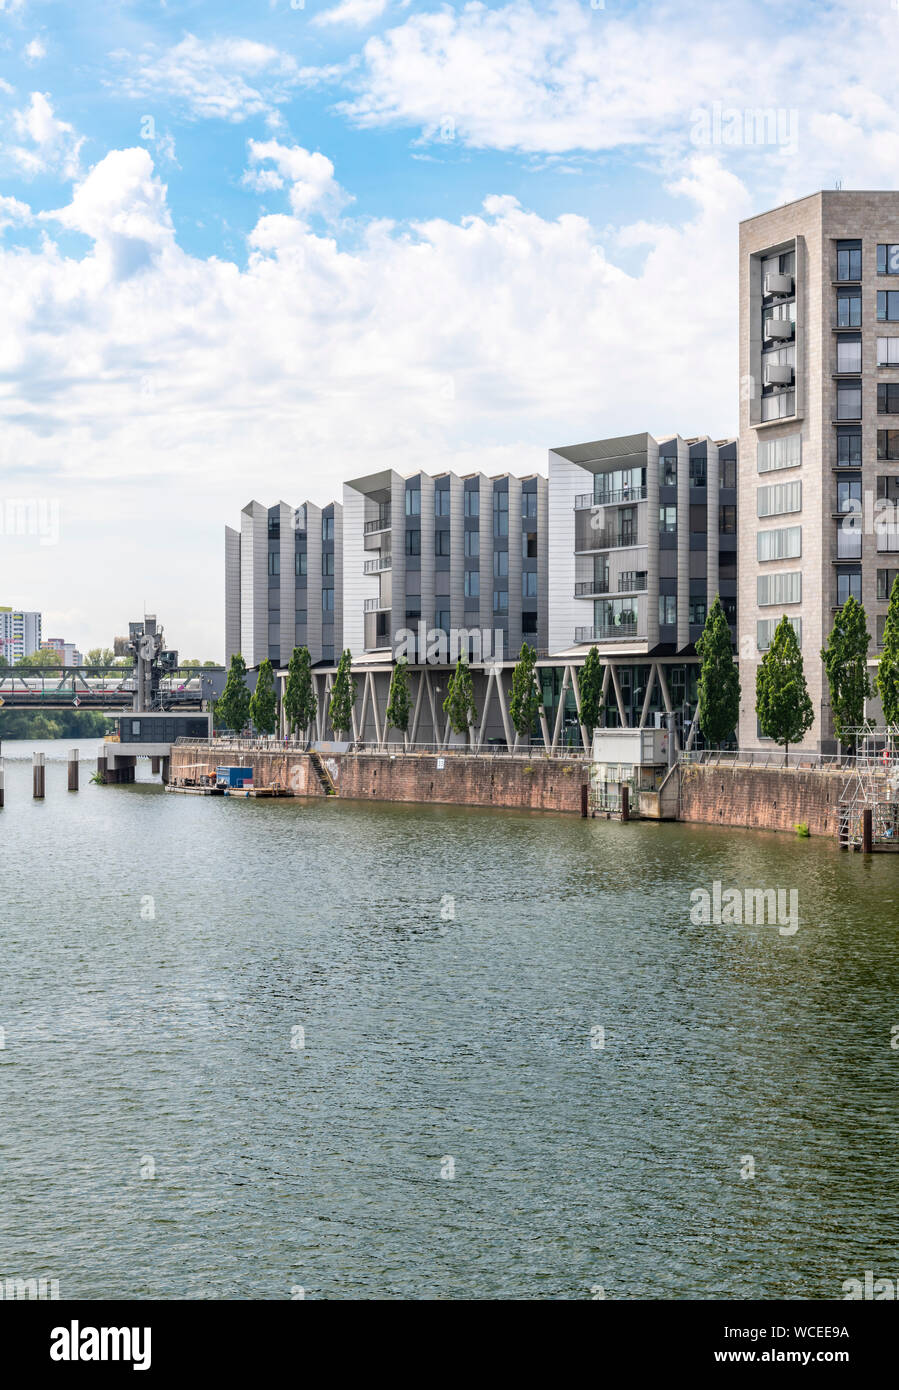 The Westhafen district of Frankfurt. In this area are the harbour and marina, Westhafen Tower is the tallest building also known as das Gerippte. Stock Photo